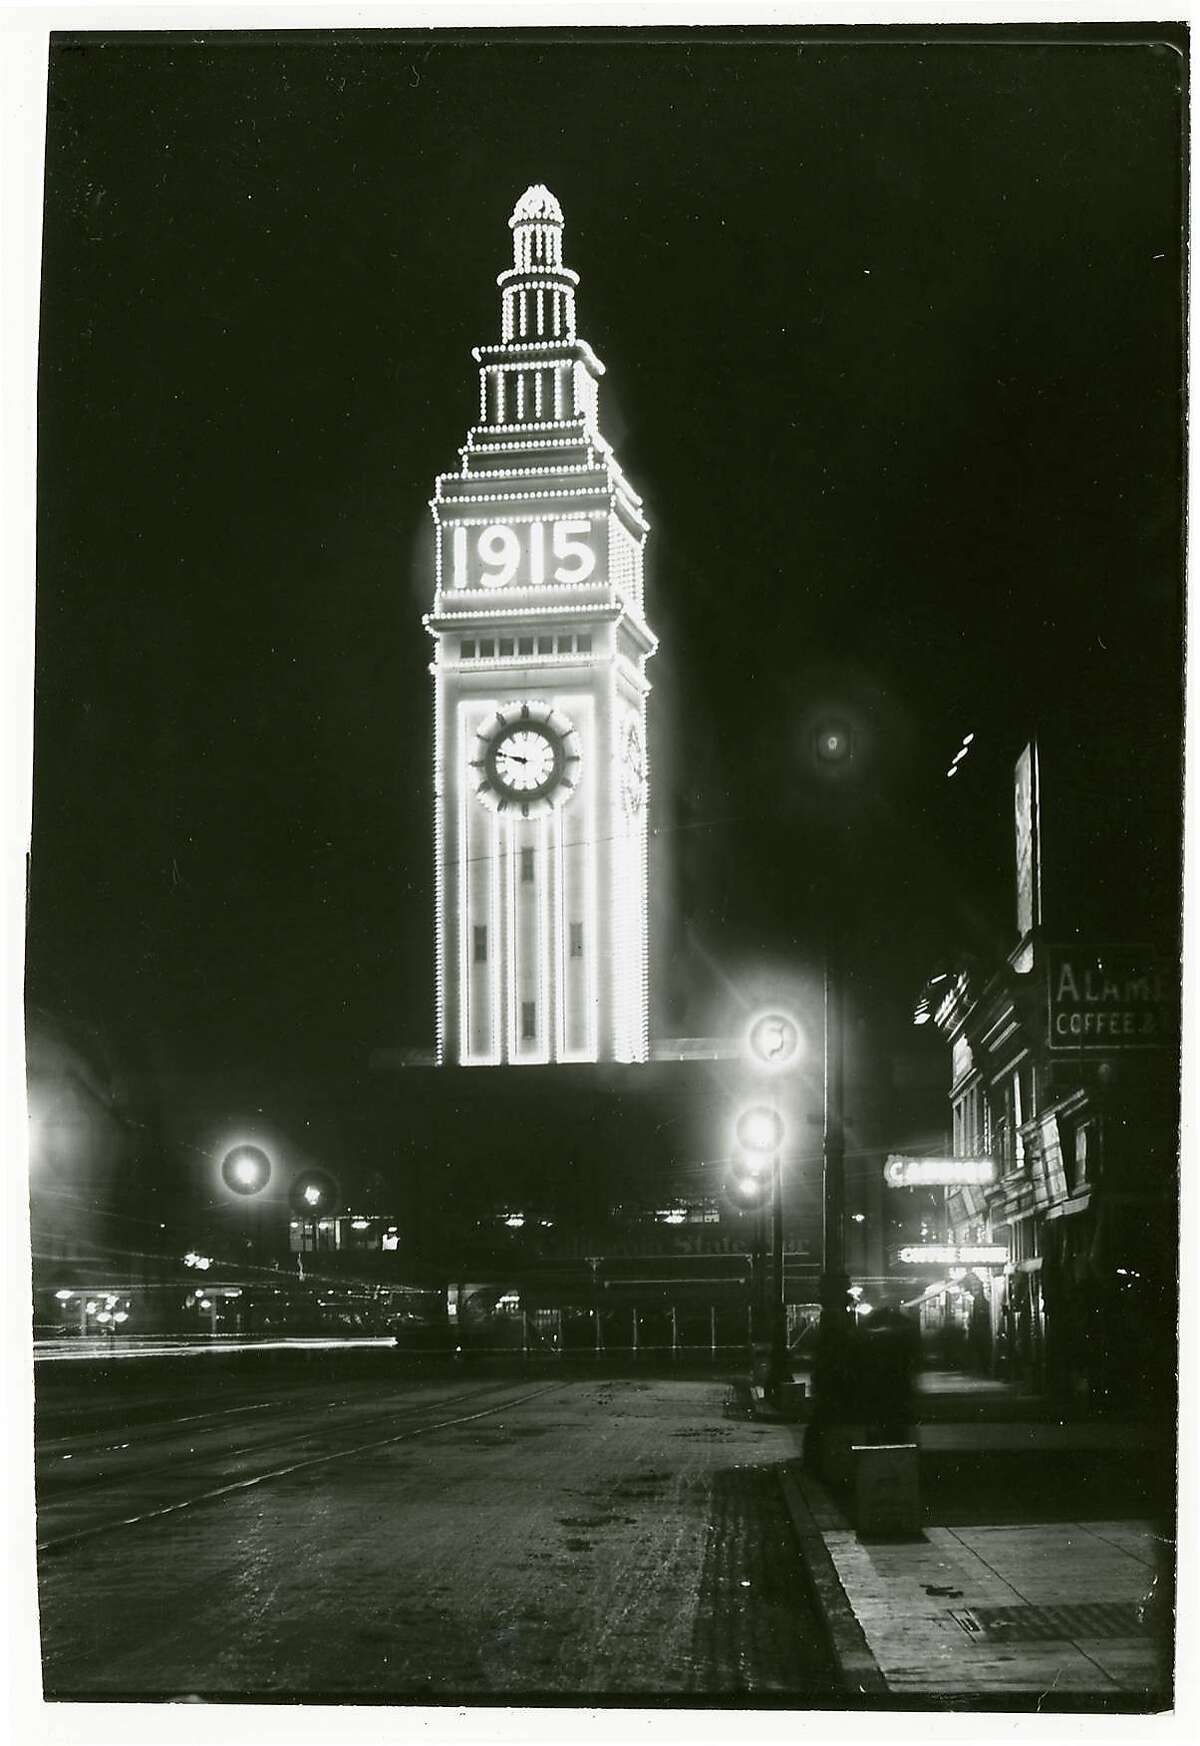 San Francisco's Ferry Building as it looked during the 1915 Panama Pacific International Exposition will be replicated during a centennial celebration of the popular fair.